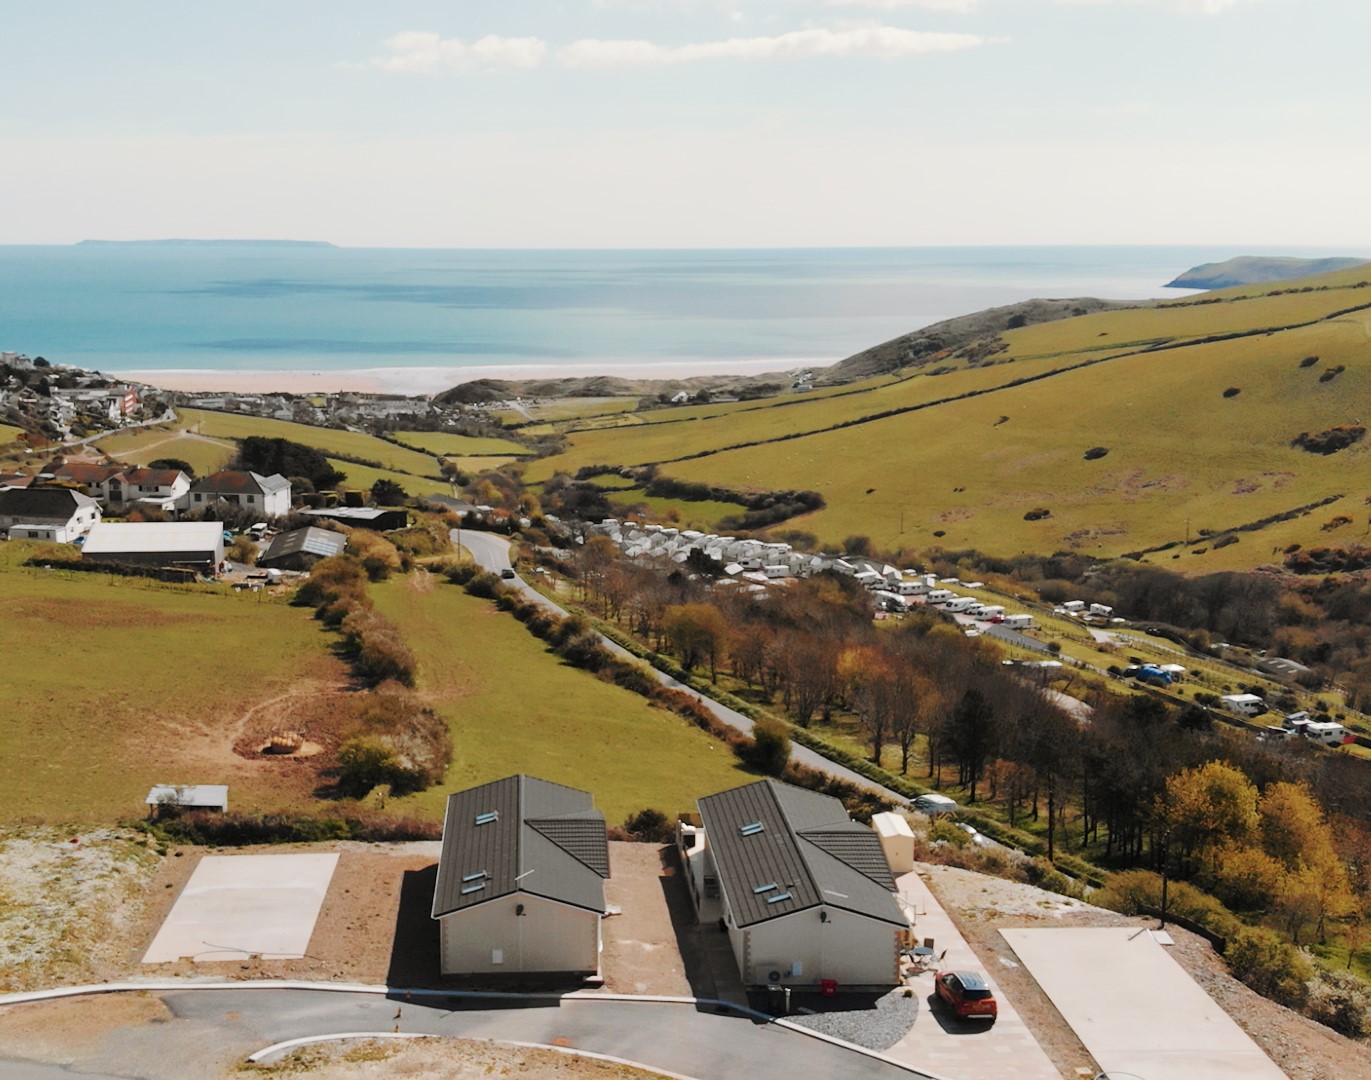 12 month Residential Park Homes For Sale in Devon